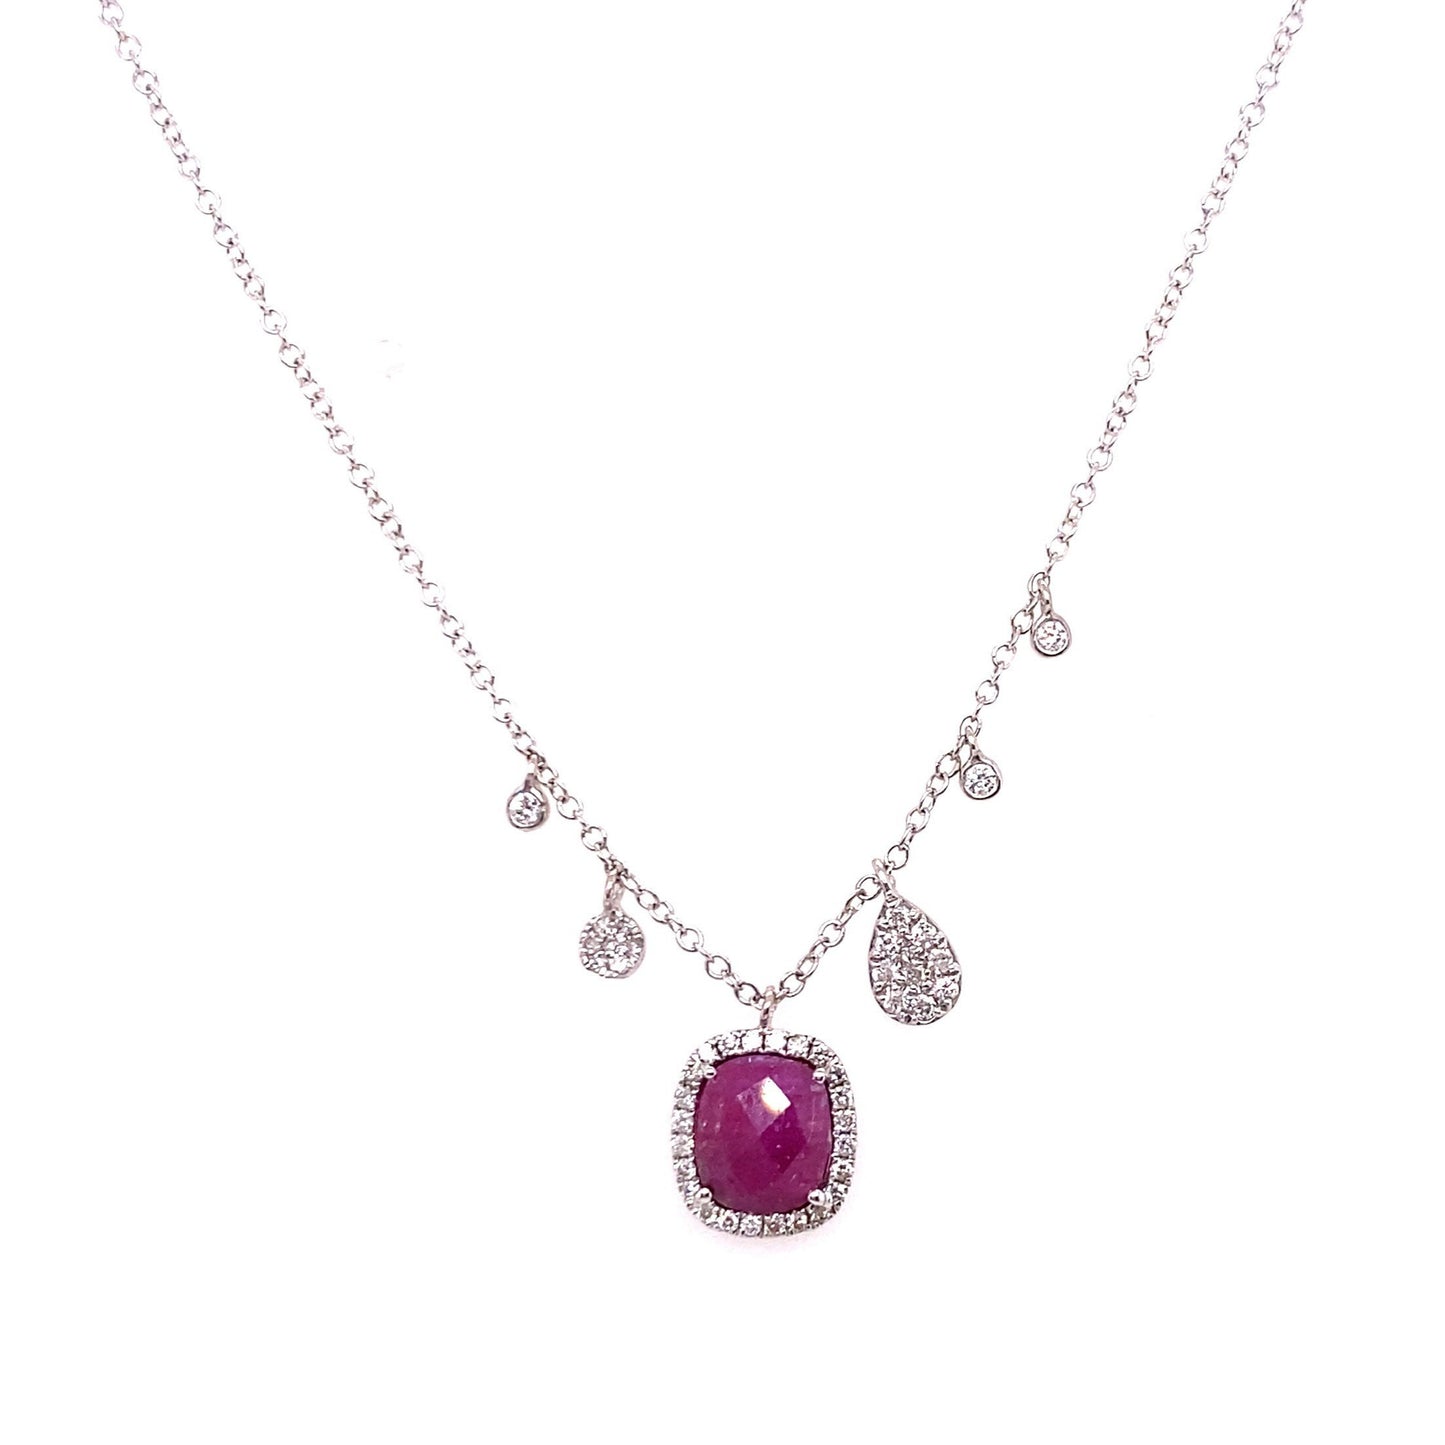 Meira T 14kt White Gold Cushion Ruby and Diamond Halo Charm Necklace